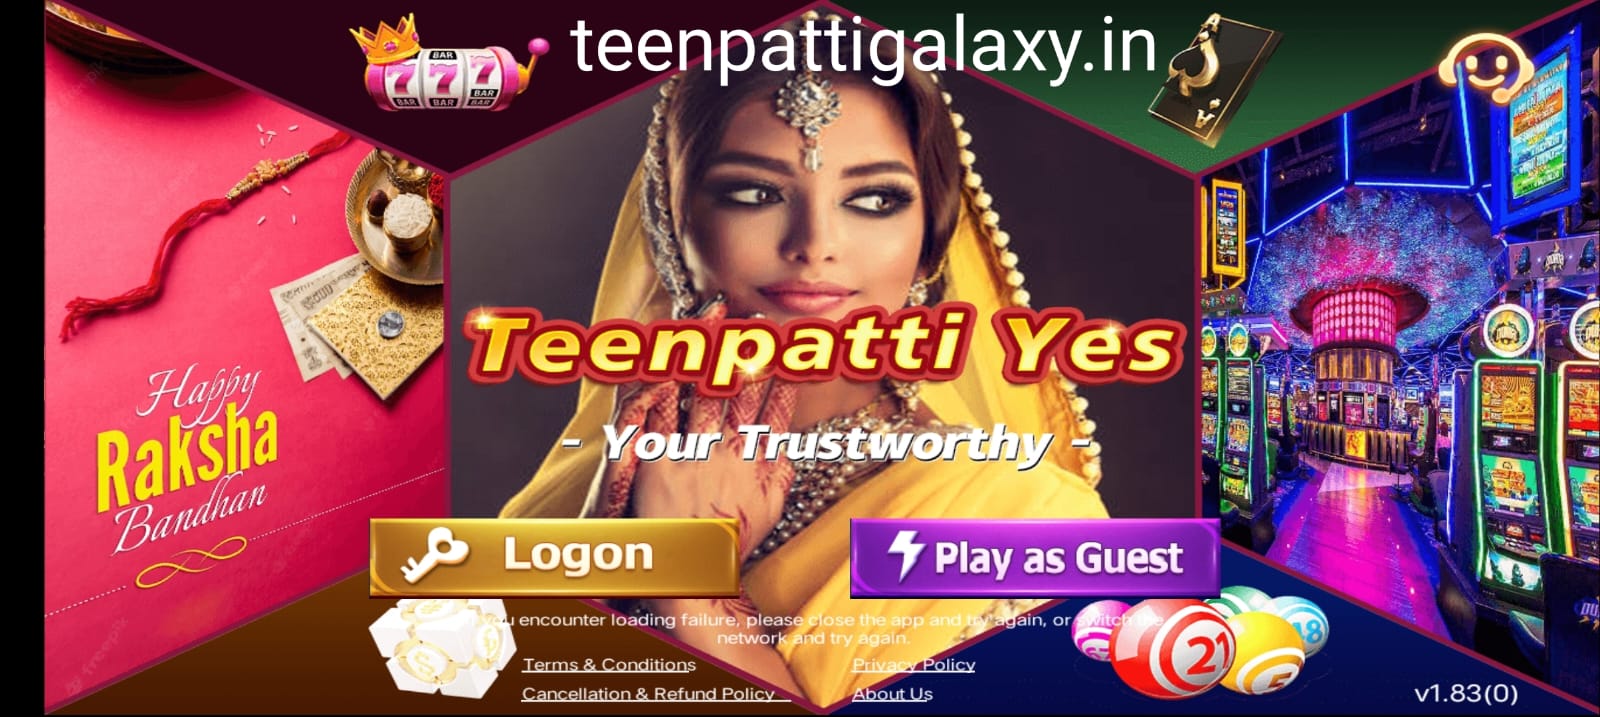 Create Account In Teen Patti Yes App